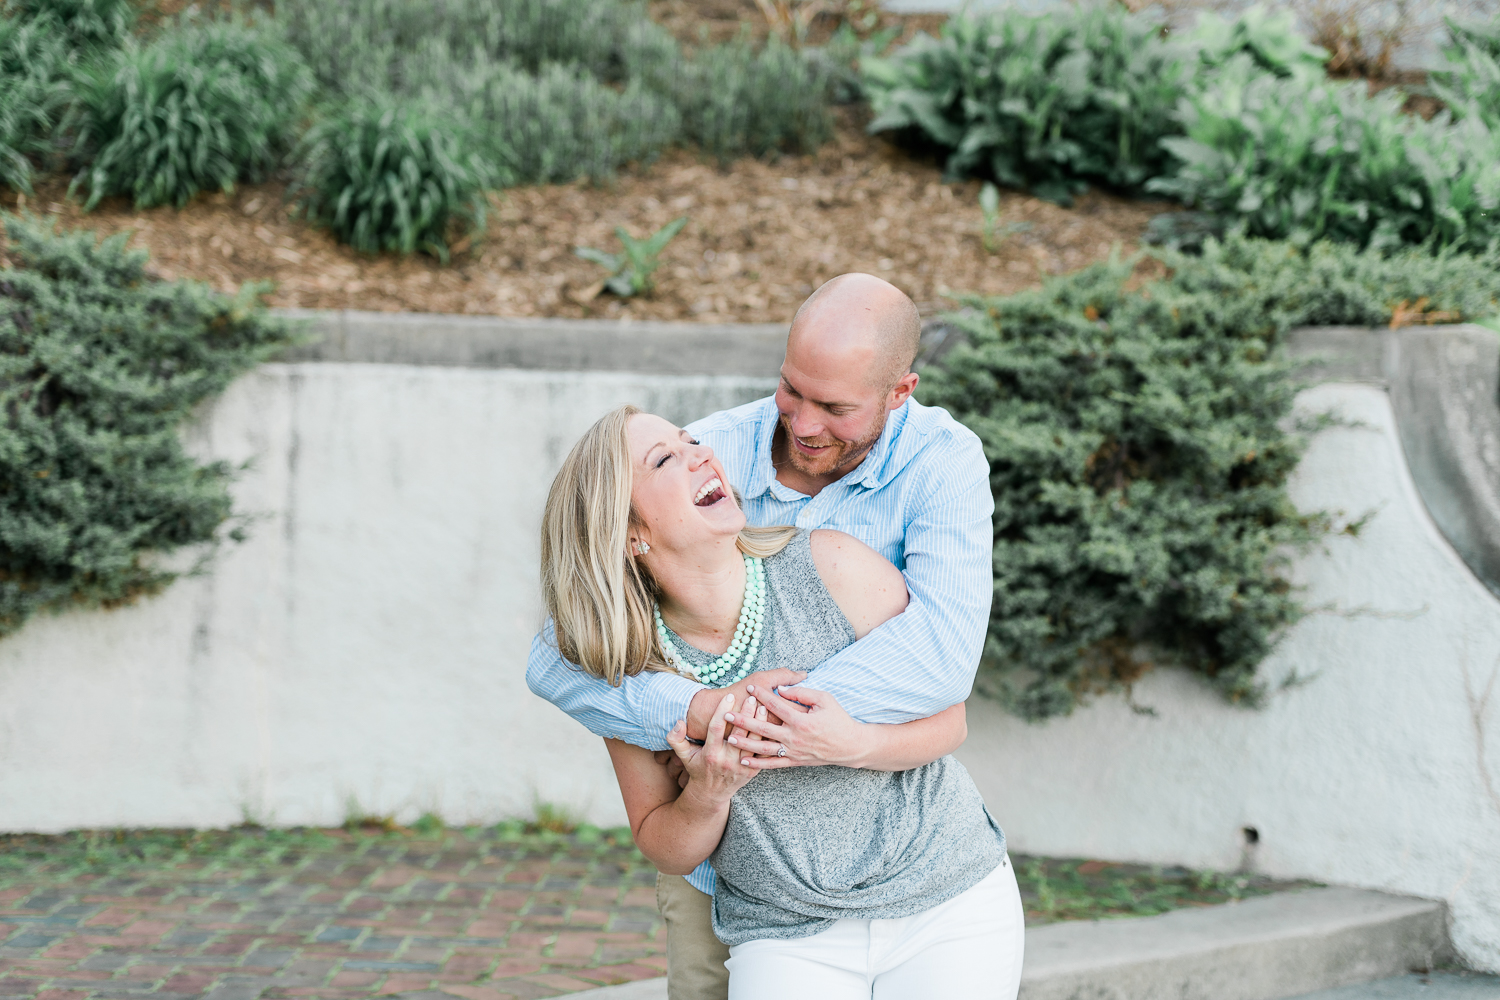 Engaged couple in gray and light blue hugging tightly while laughing